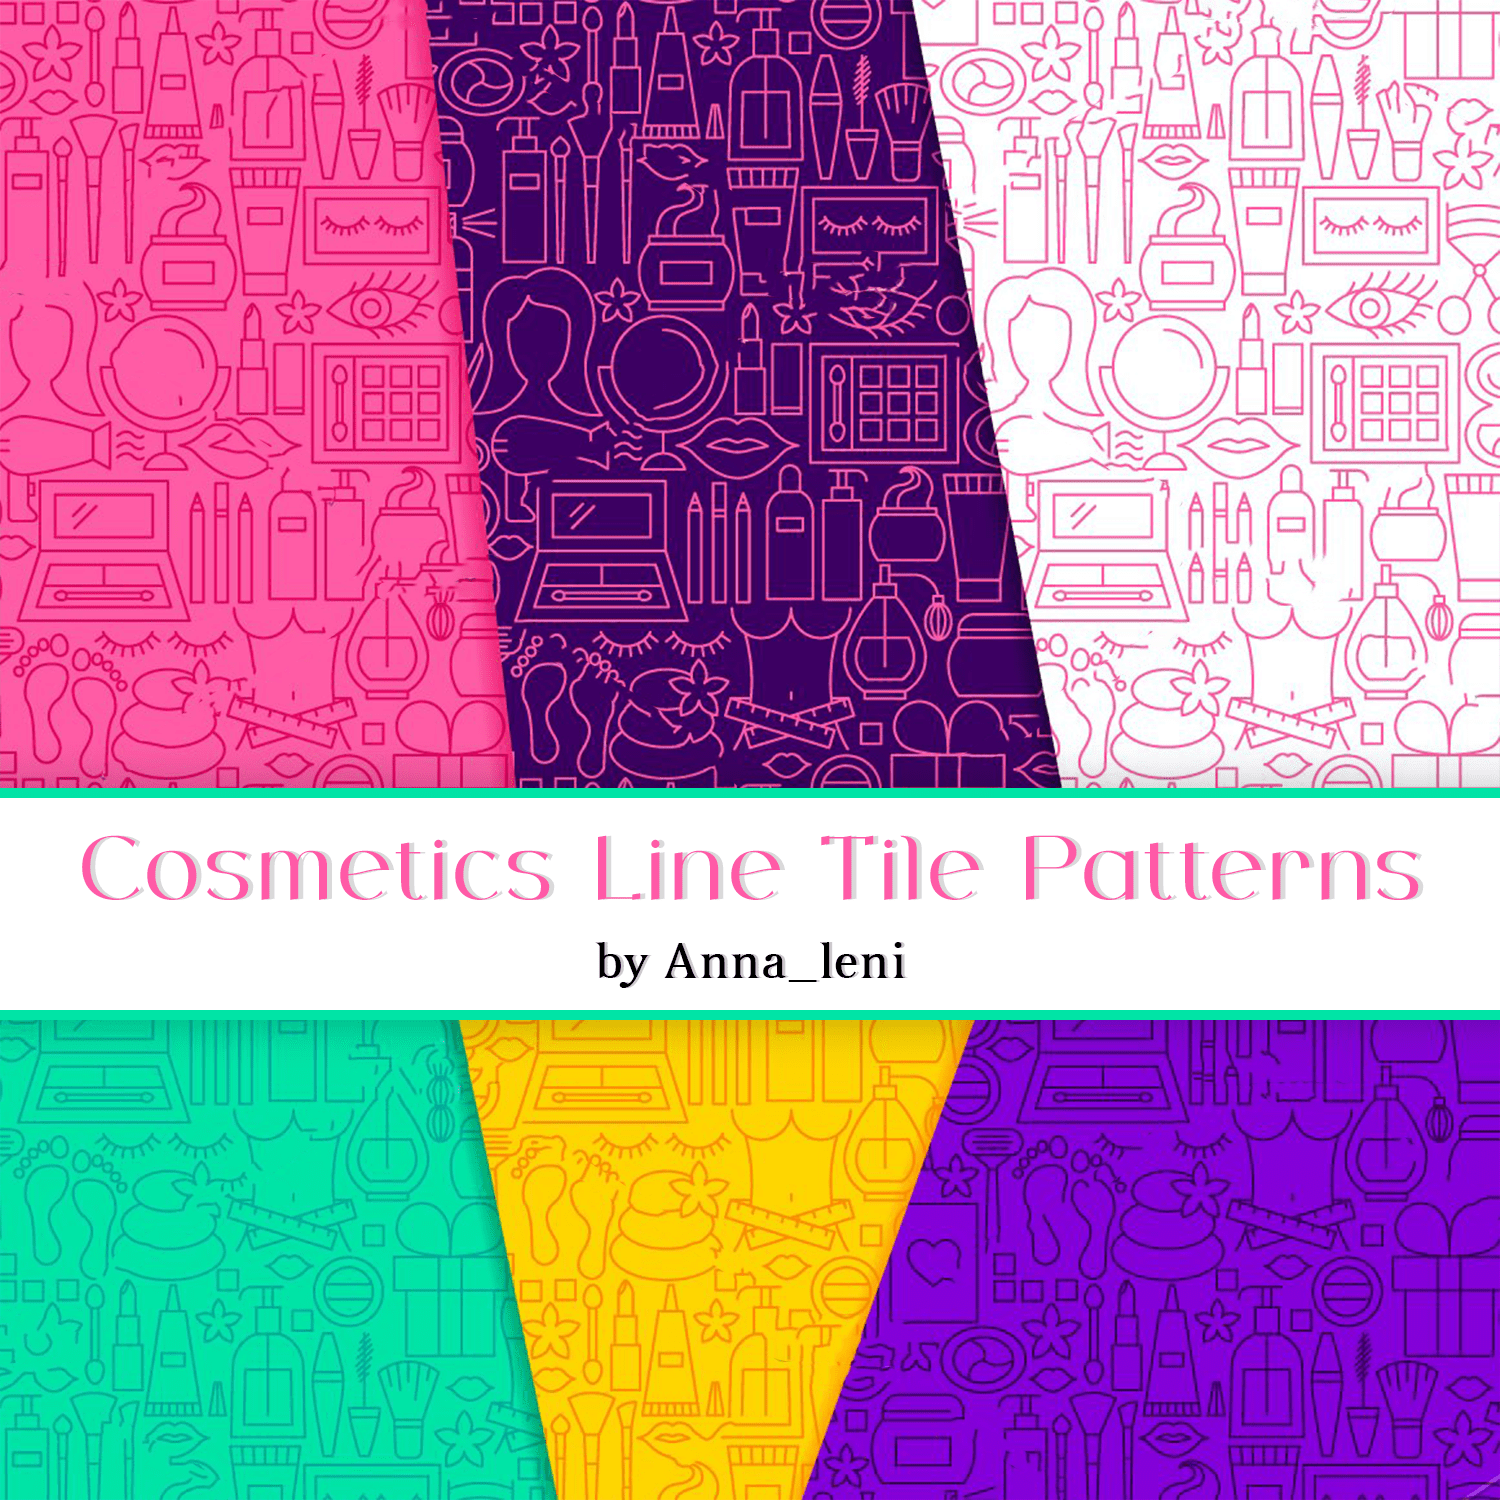 Cosmetics Line Tile Patterns cover.